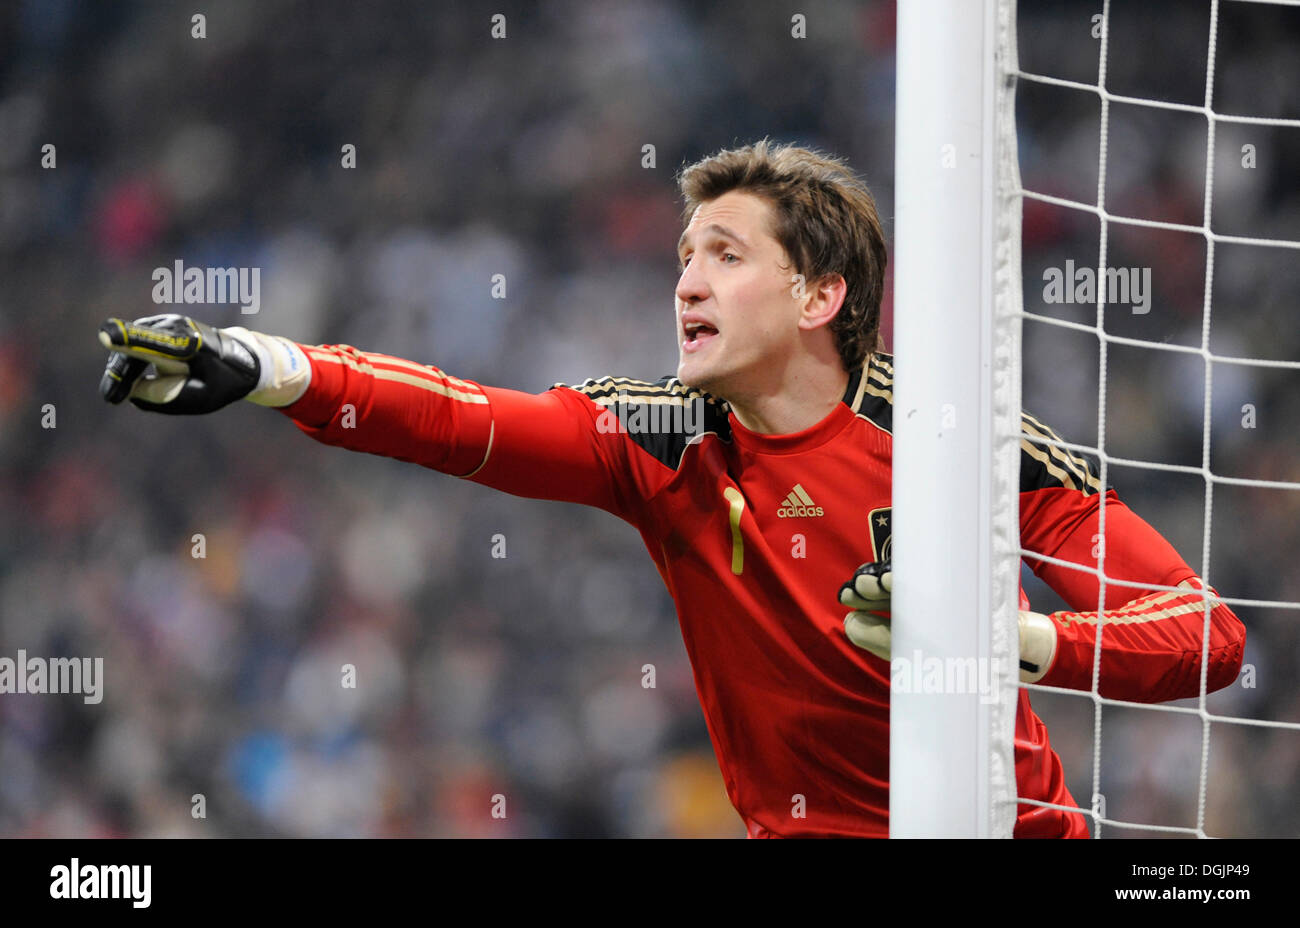 Rene Adler, goalkeeper of the German national team, in the new jersey for the World Cup 2010 Stock Photo